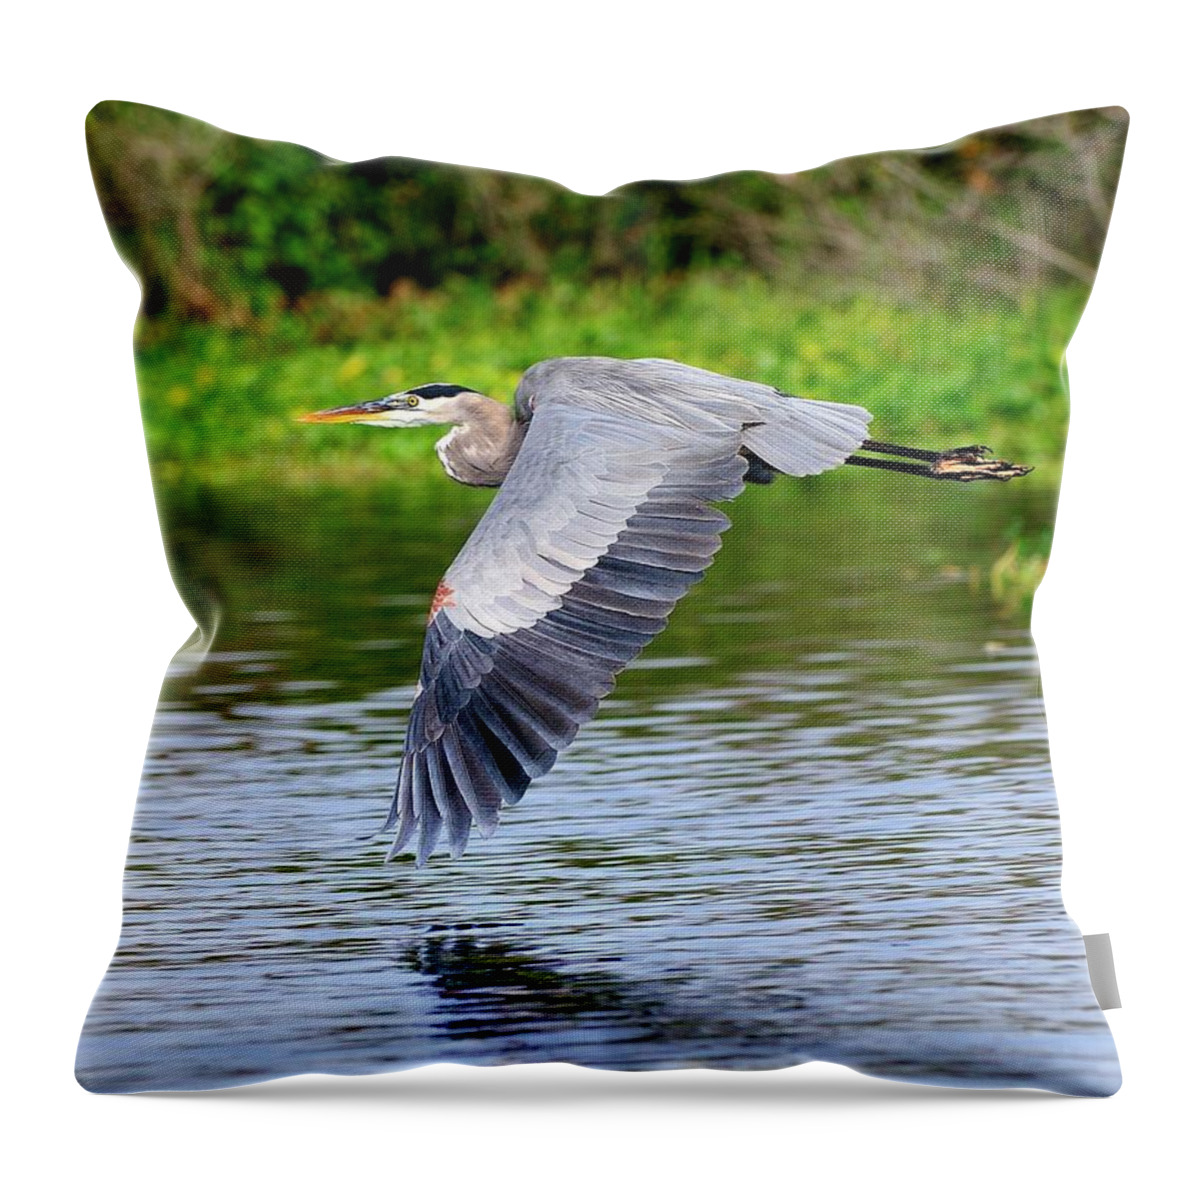 Great Throw Pillow featuring the photograph Great Blue Heron Inflight by Bill Dodsworth